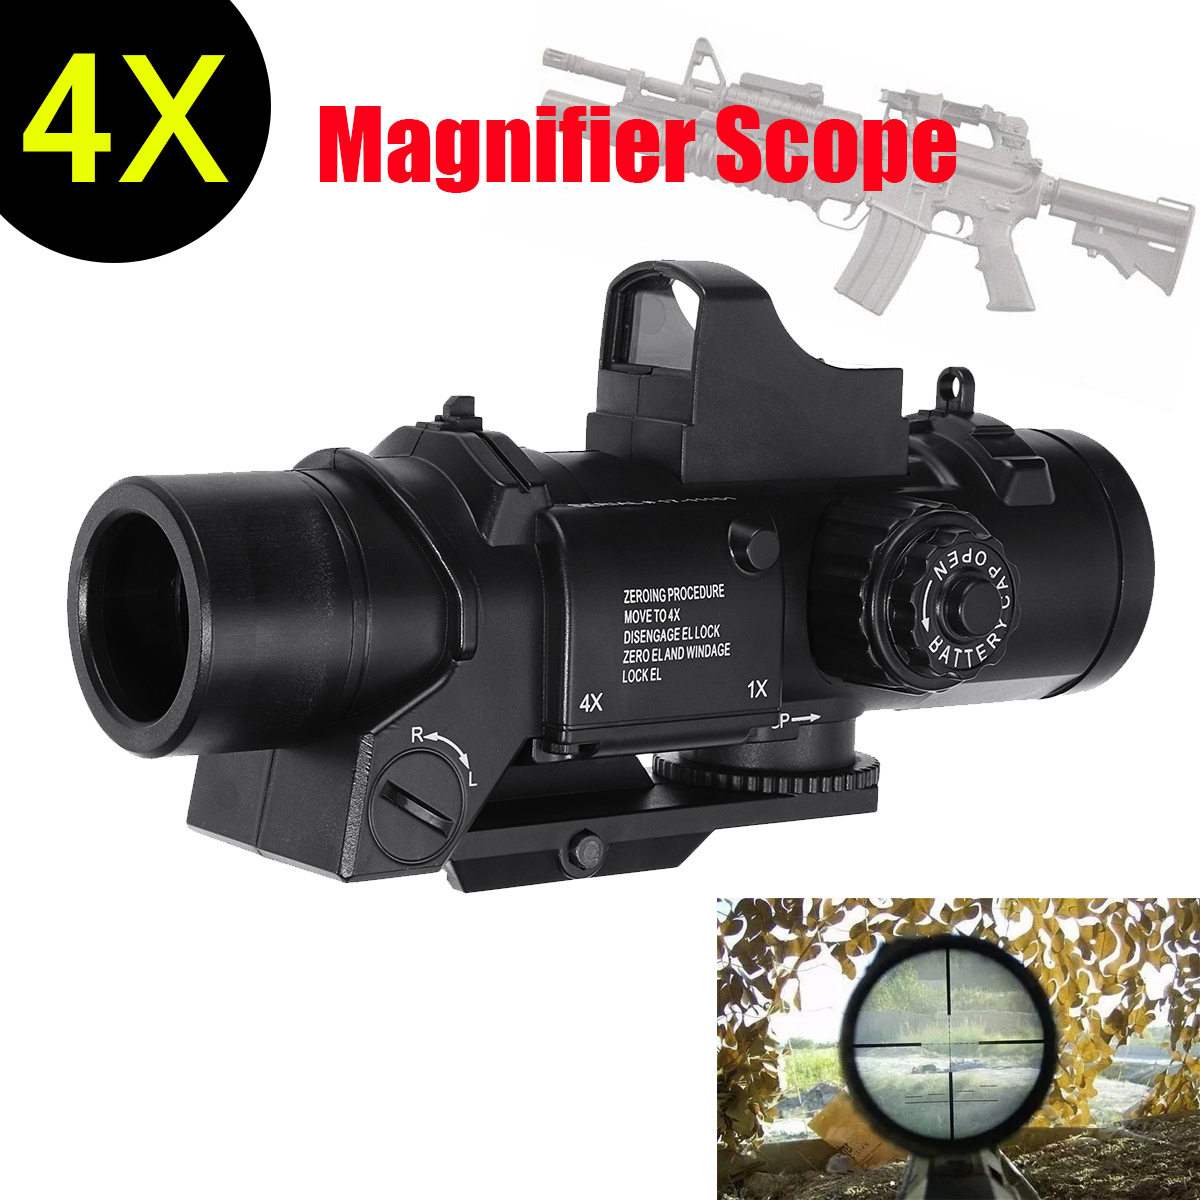 4X Mirror Magnifier Scope with Red Dot Sights For Jinming Gel Ball Water Toy 17